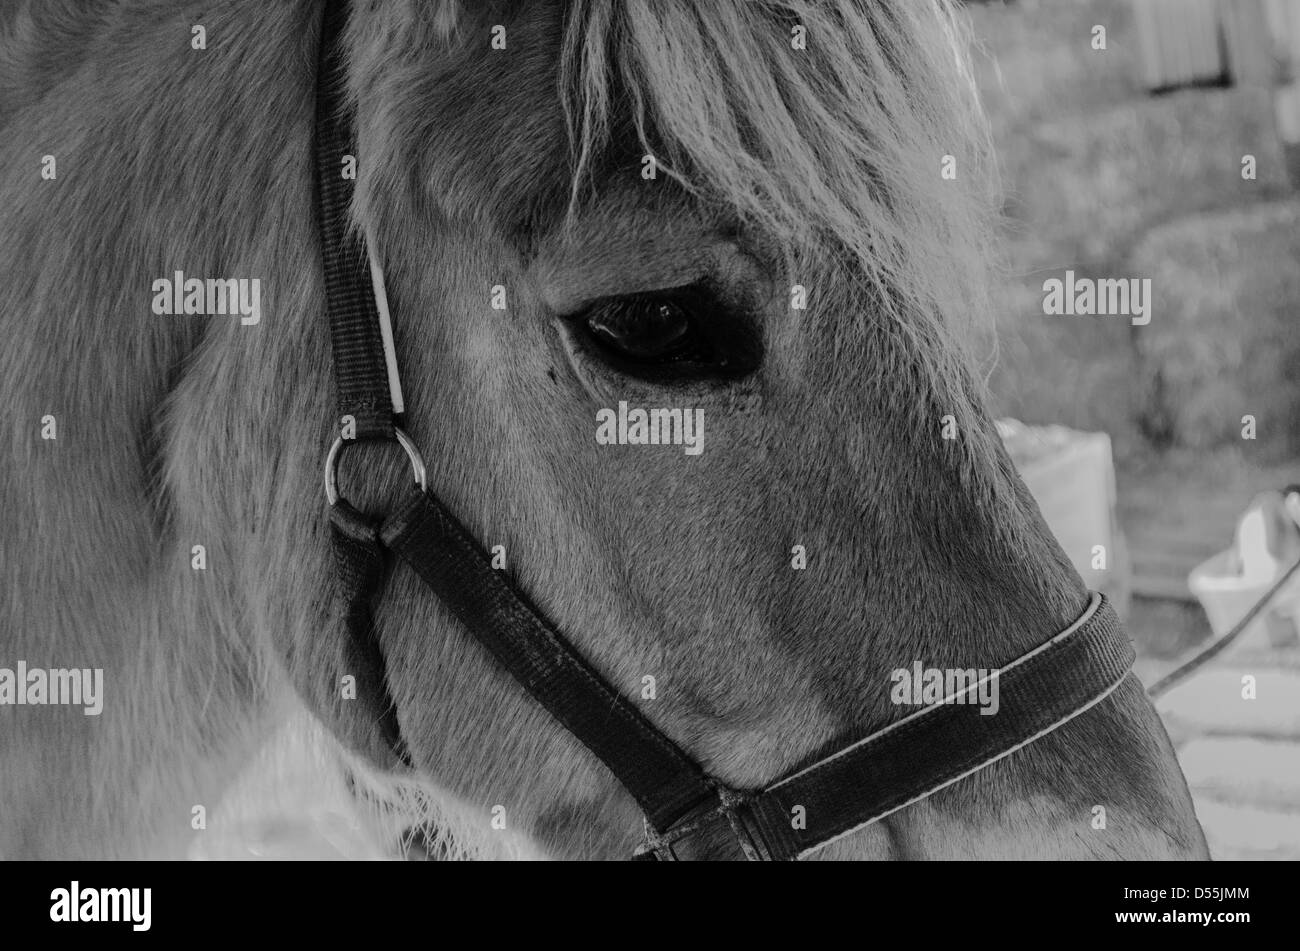 Black and White head shot of a horse. Stock Photo